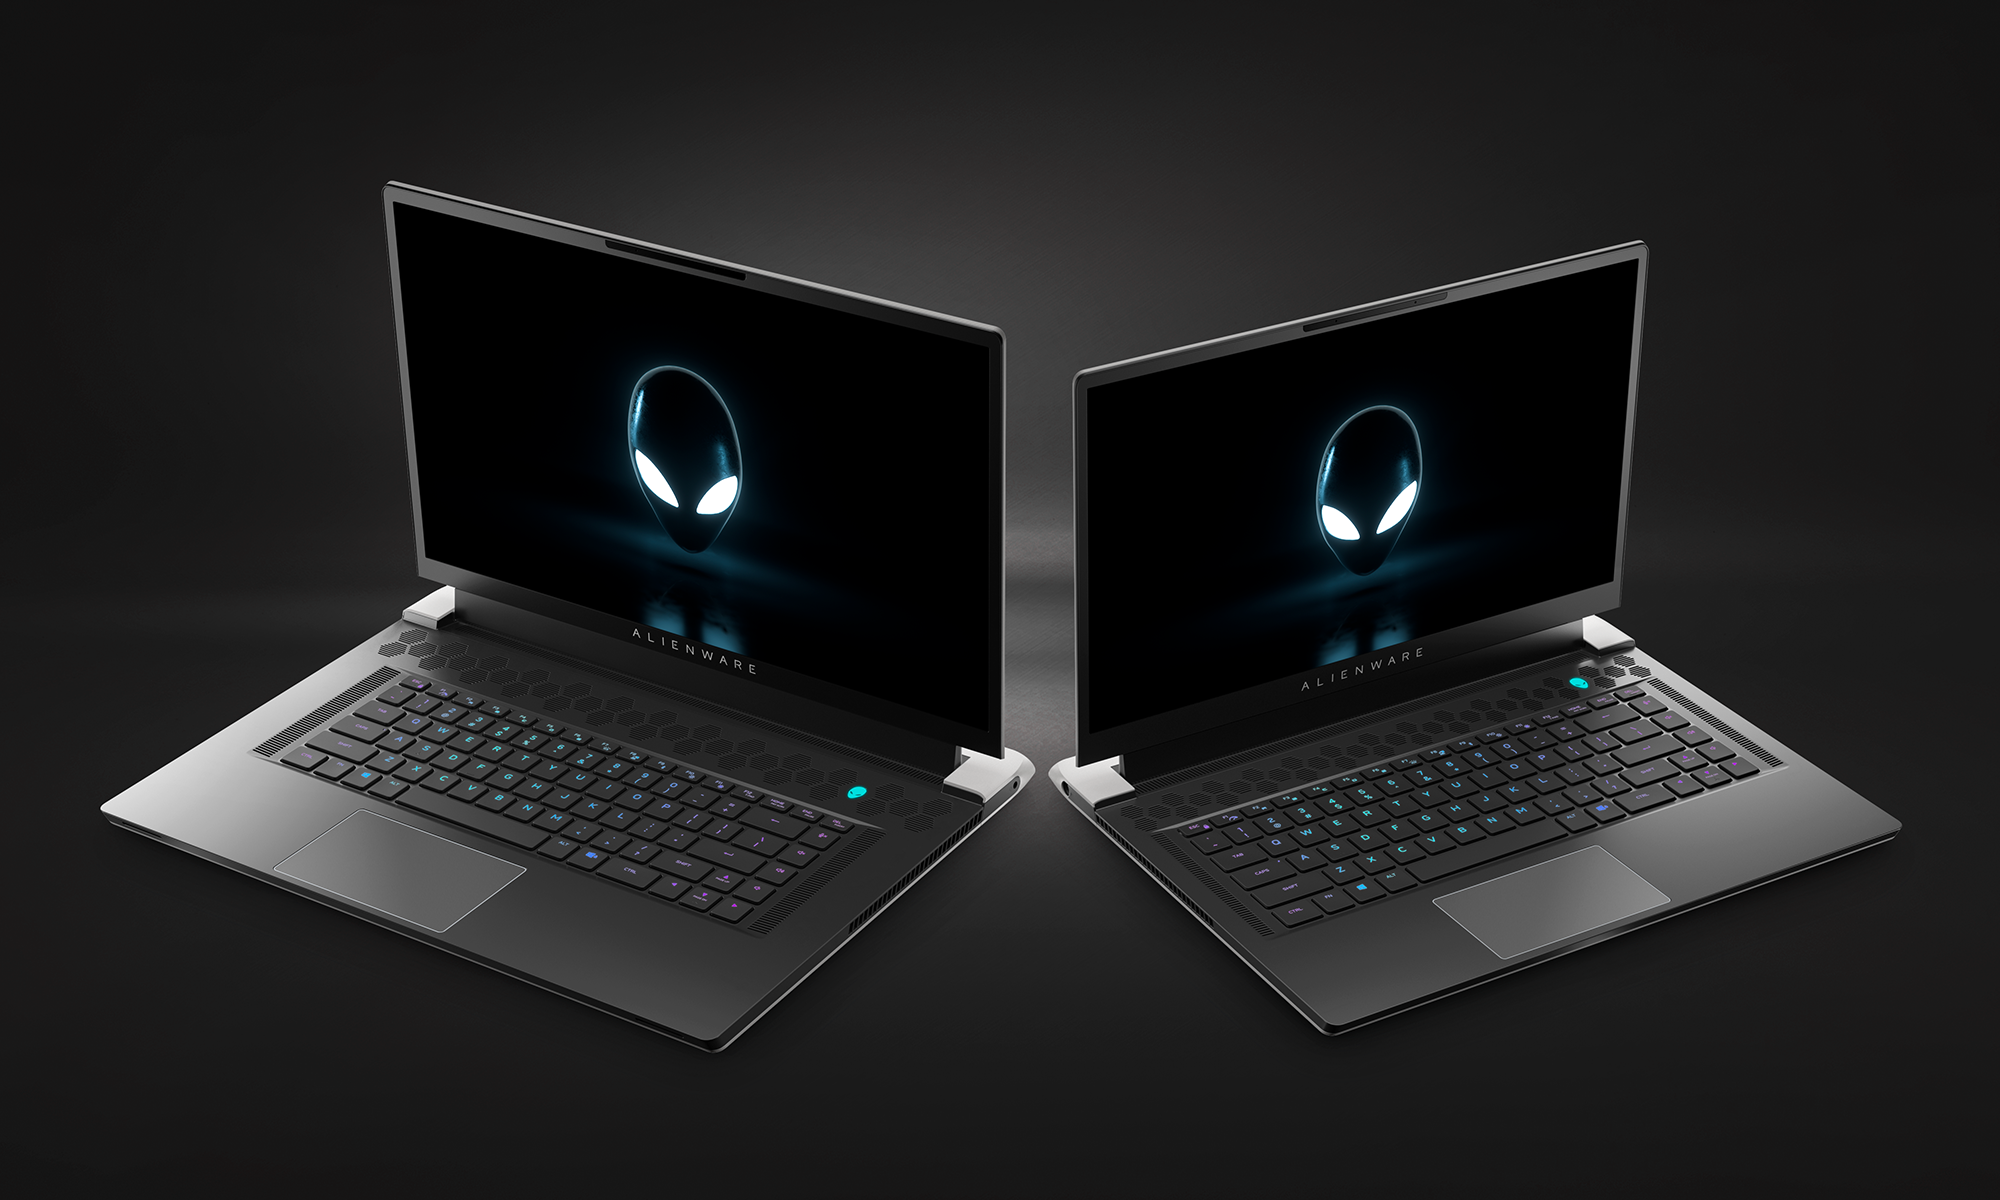 X Marks the Spot: Alienware targets new frontiers with brand new X-Series Gaming Laptops